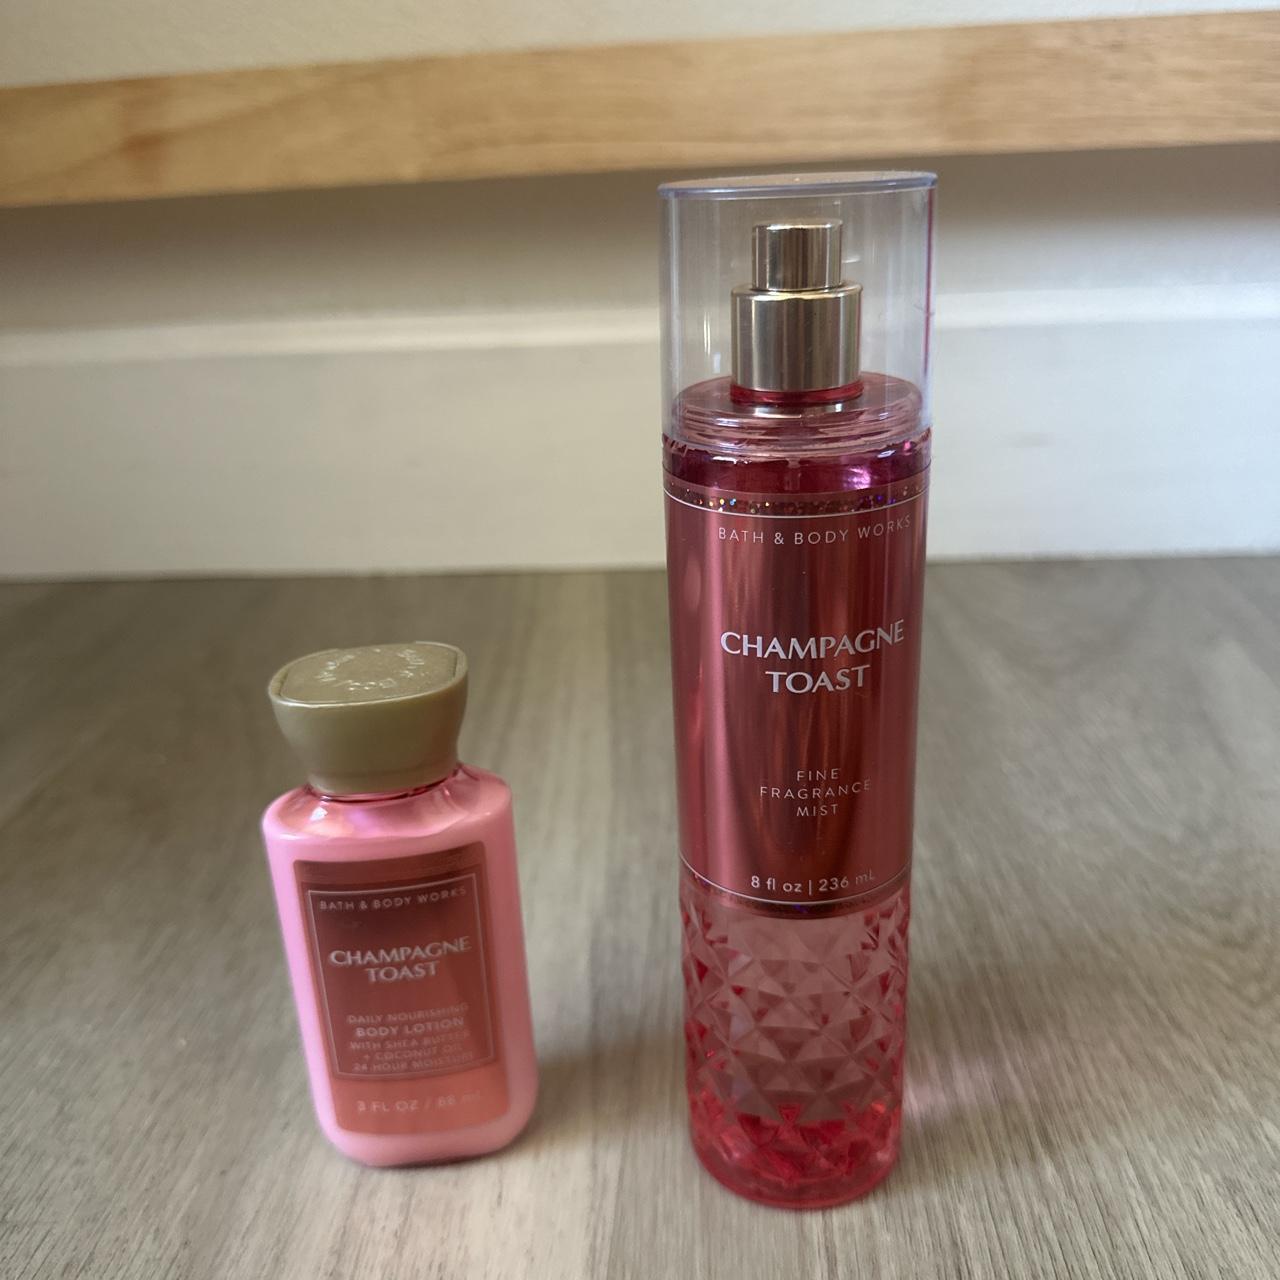 Champagne toast body lotion and fine fragrance mist  - Depop